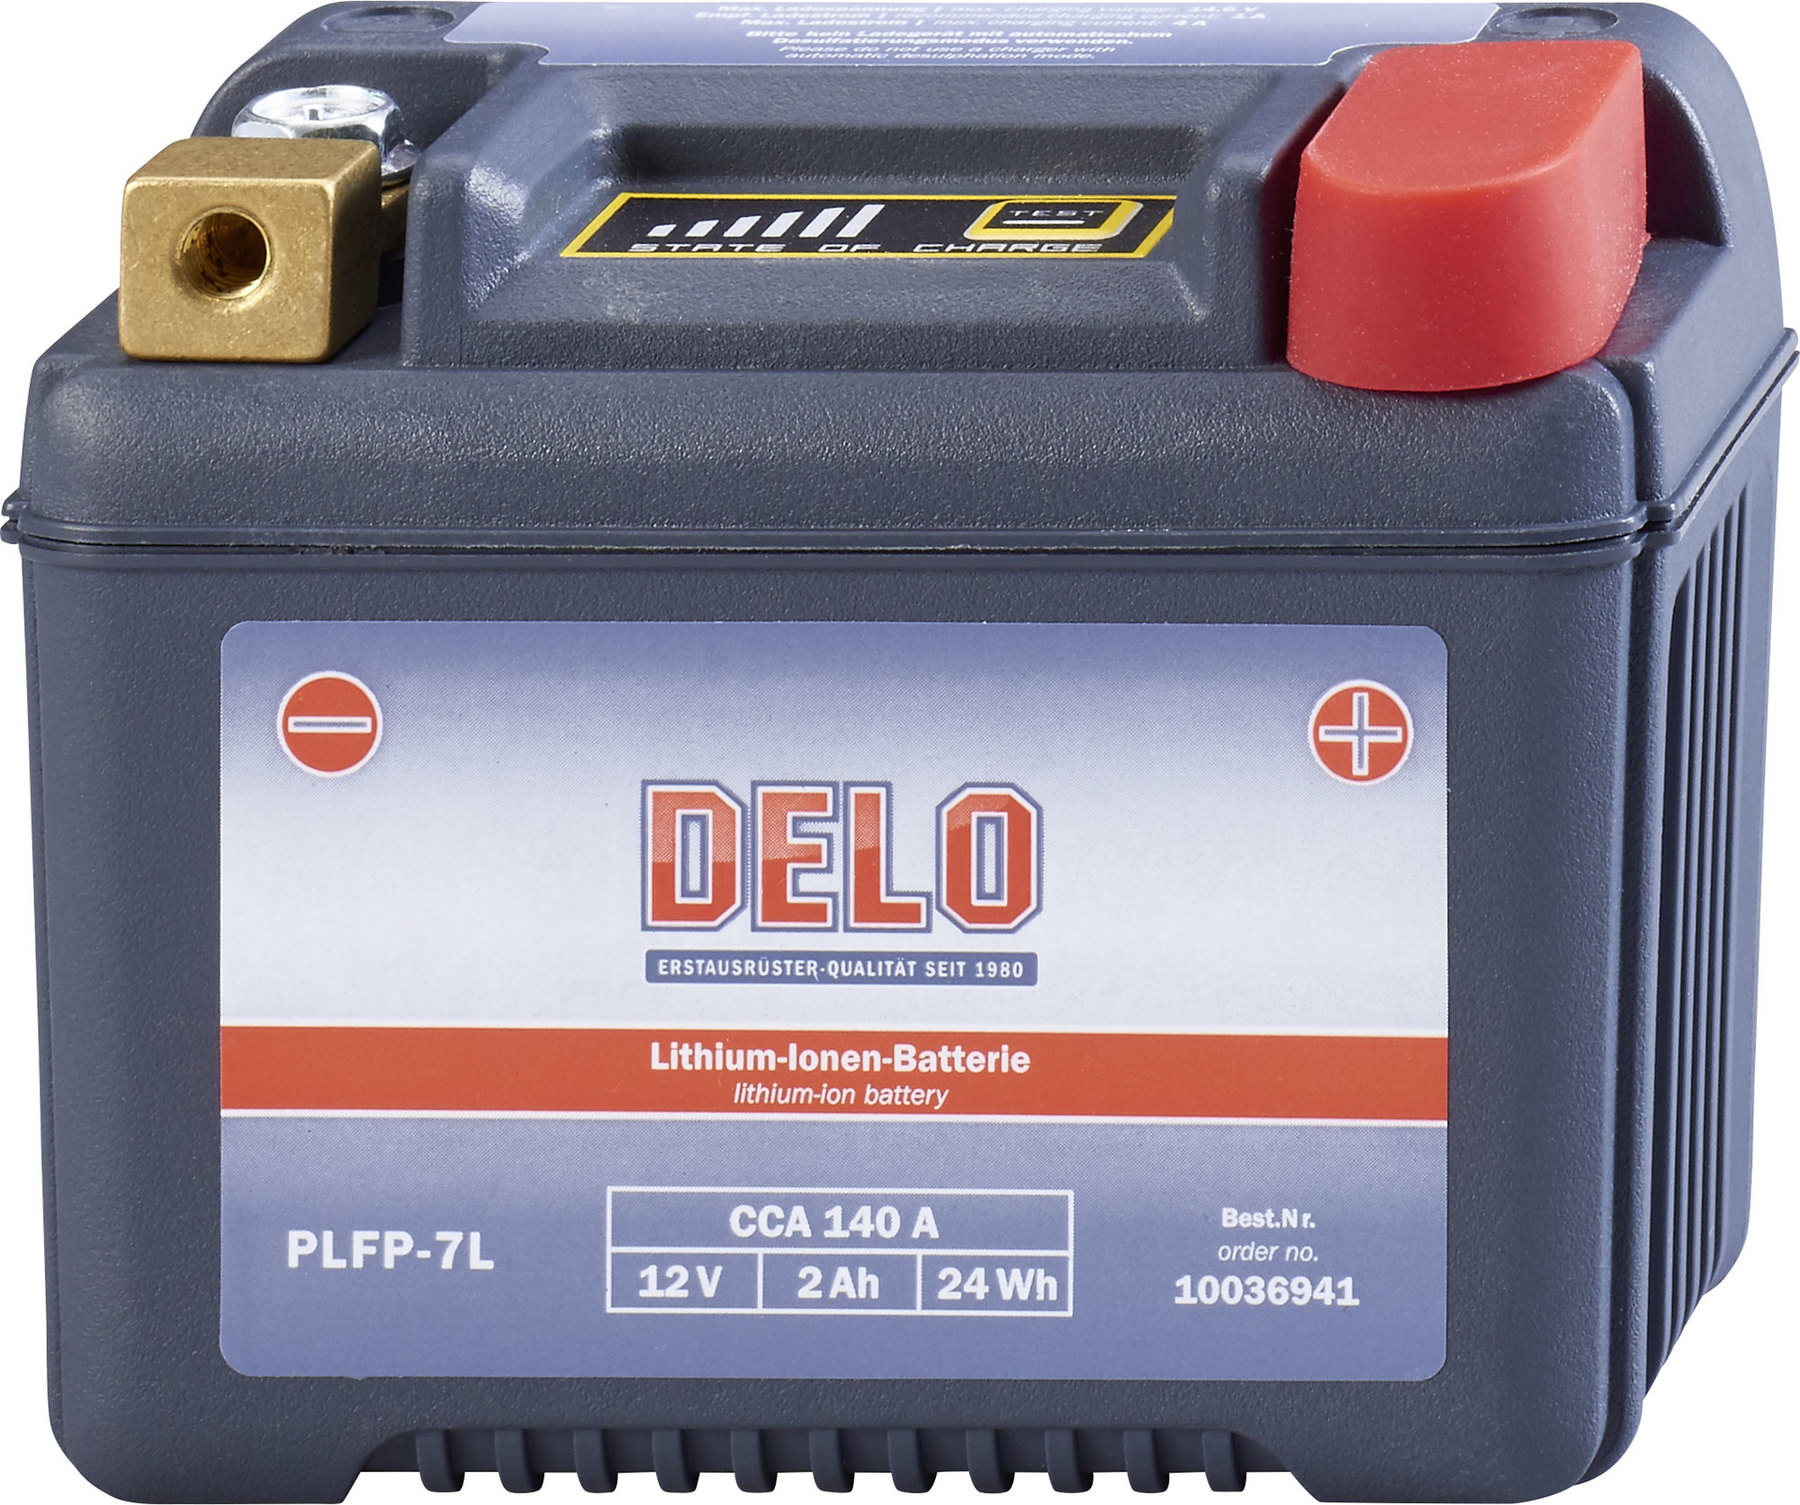 Buy DELO Lithium-Ion Batteries | Louis motorcycle clothing and technology